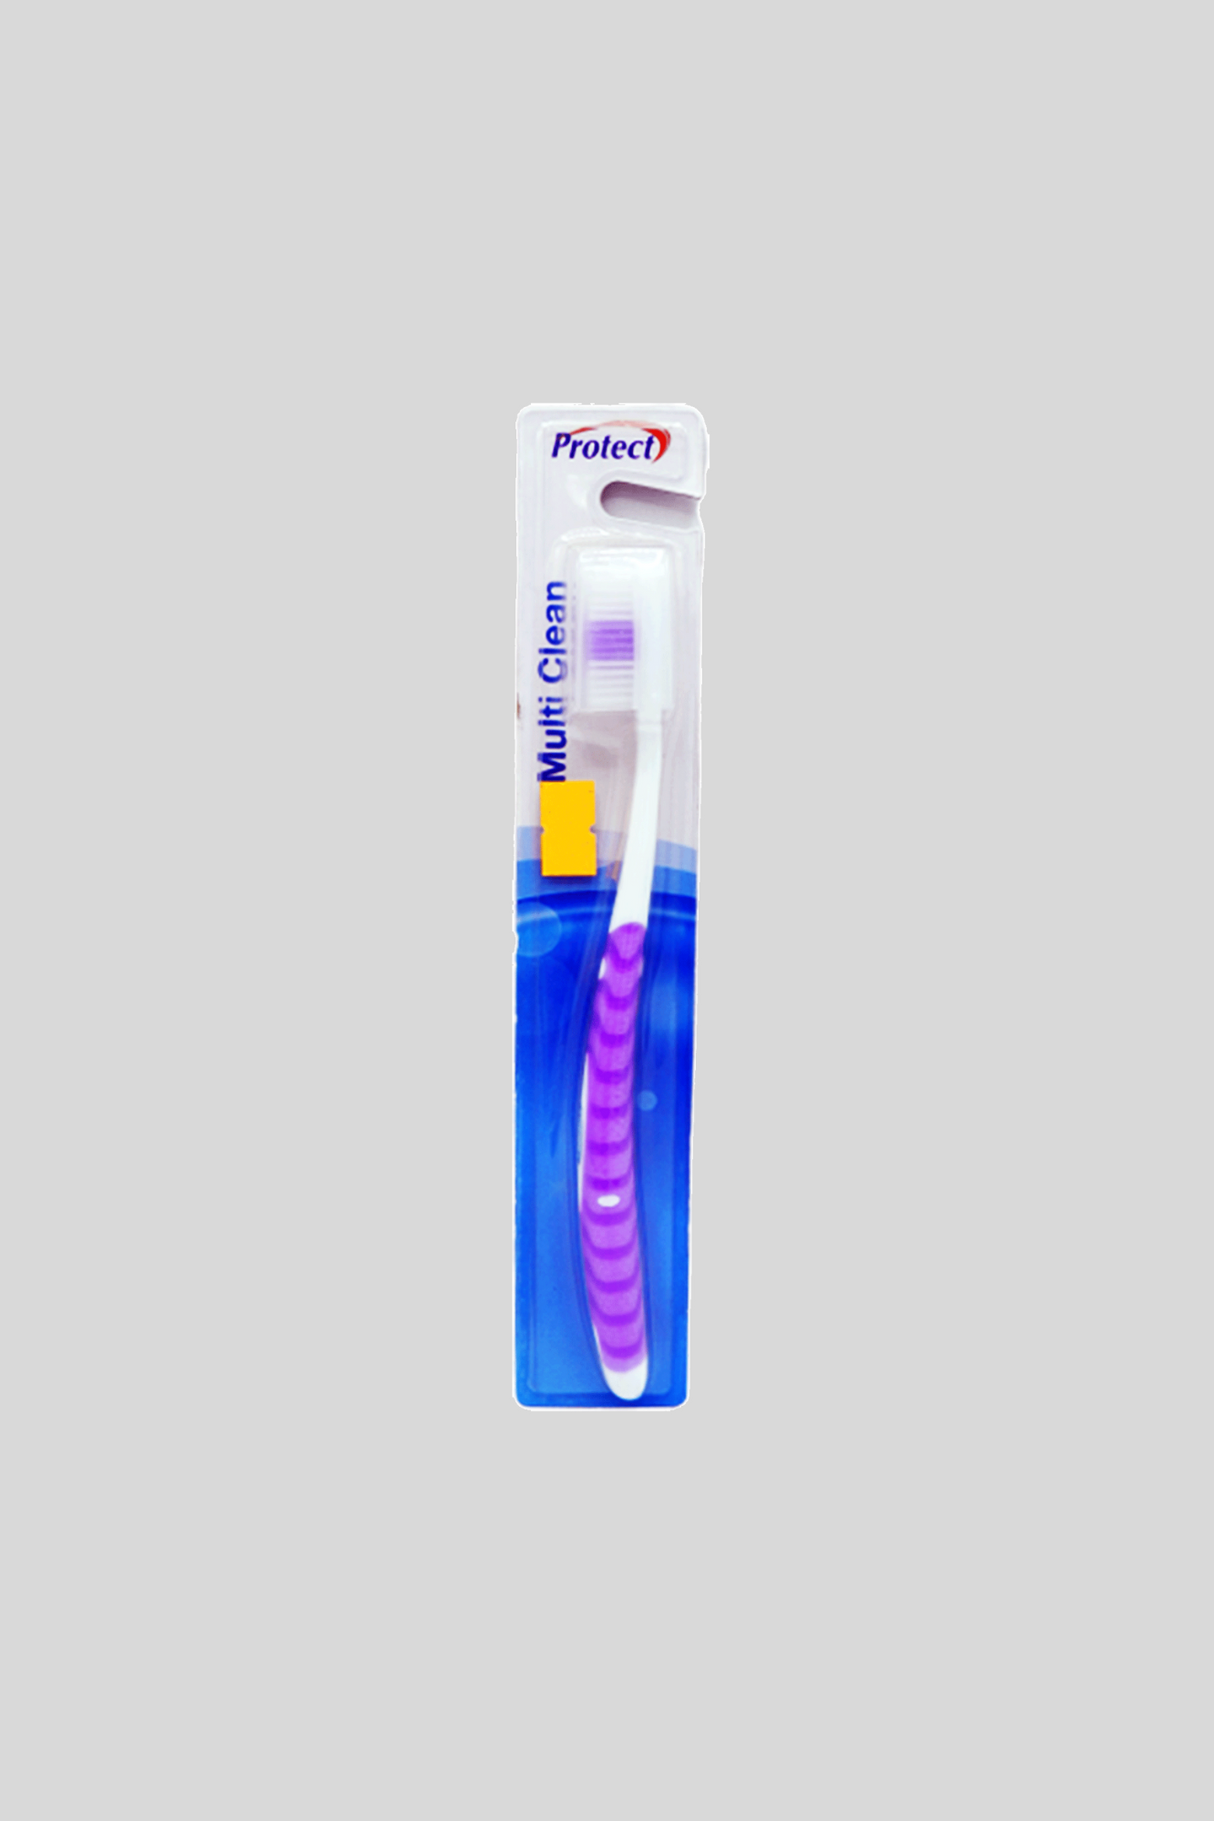 protect tooth brush multi clean